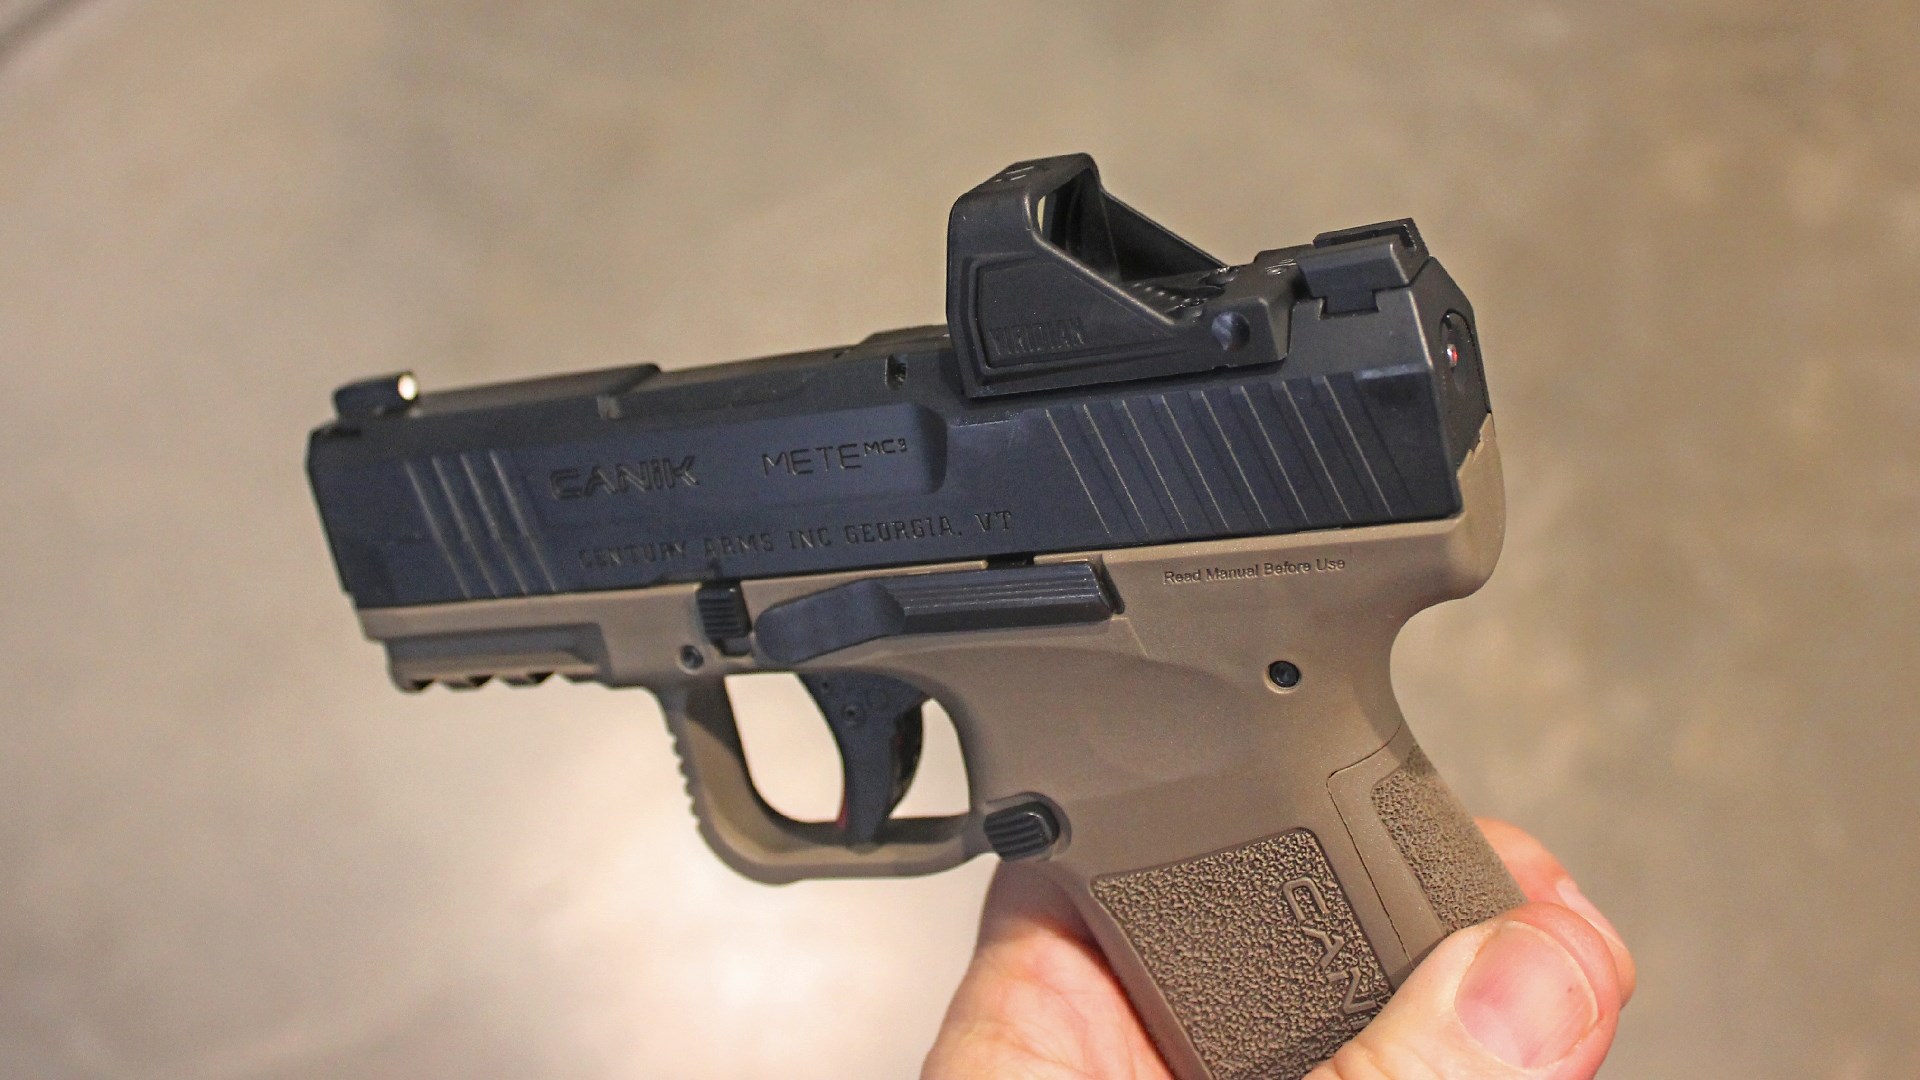 Canik Mete MC9 pistol in hand shown with red-dot optic viridian rfx11